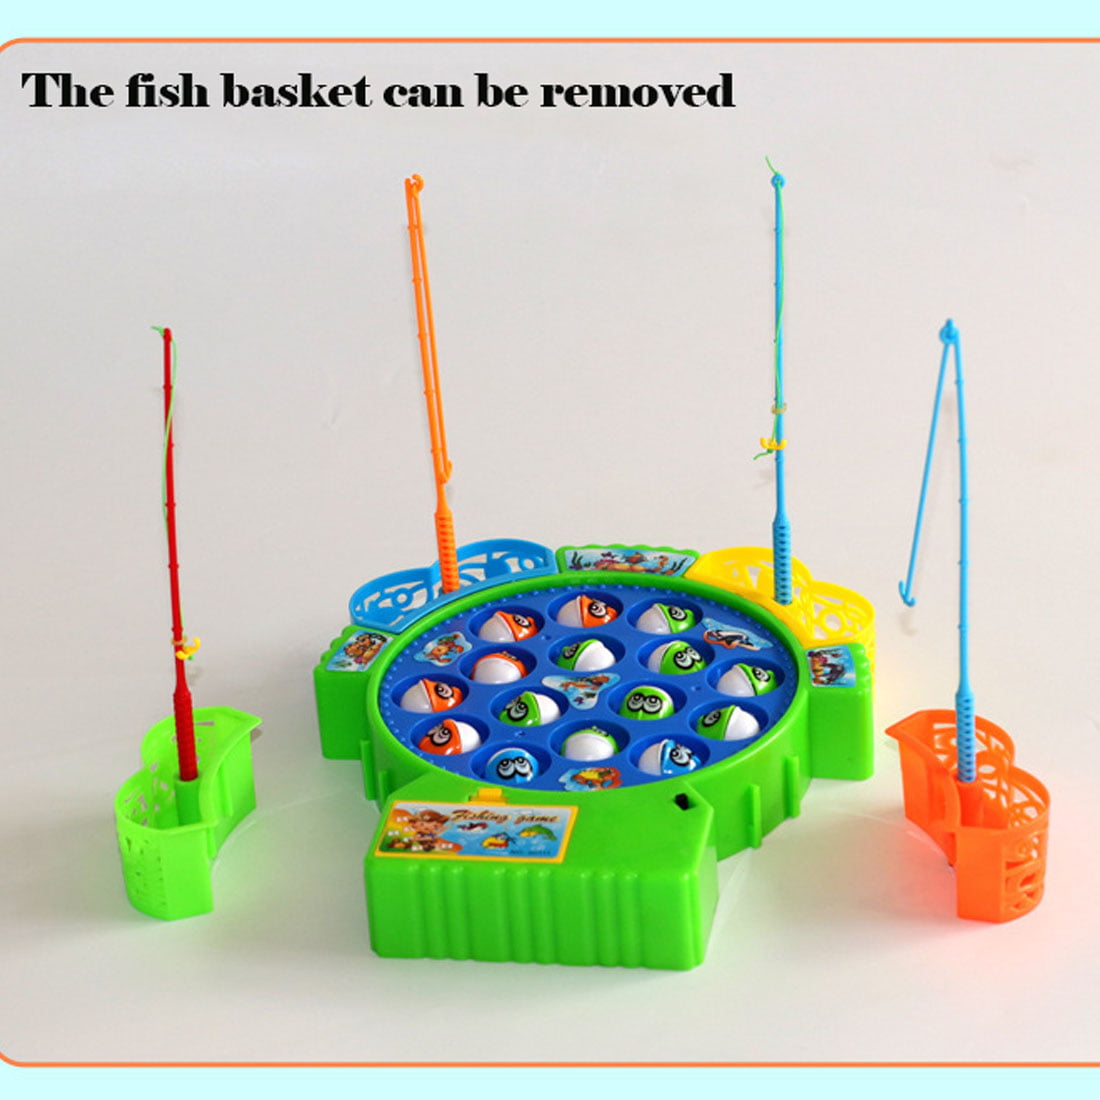 Cardinal Games 6054916 Baby Shark Gone Fishing Game, Multi Colour